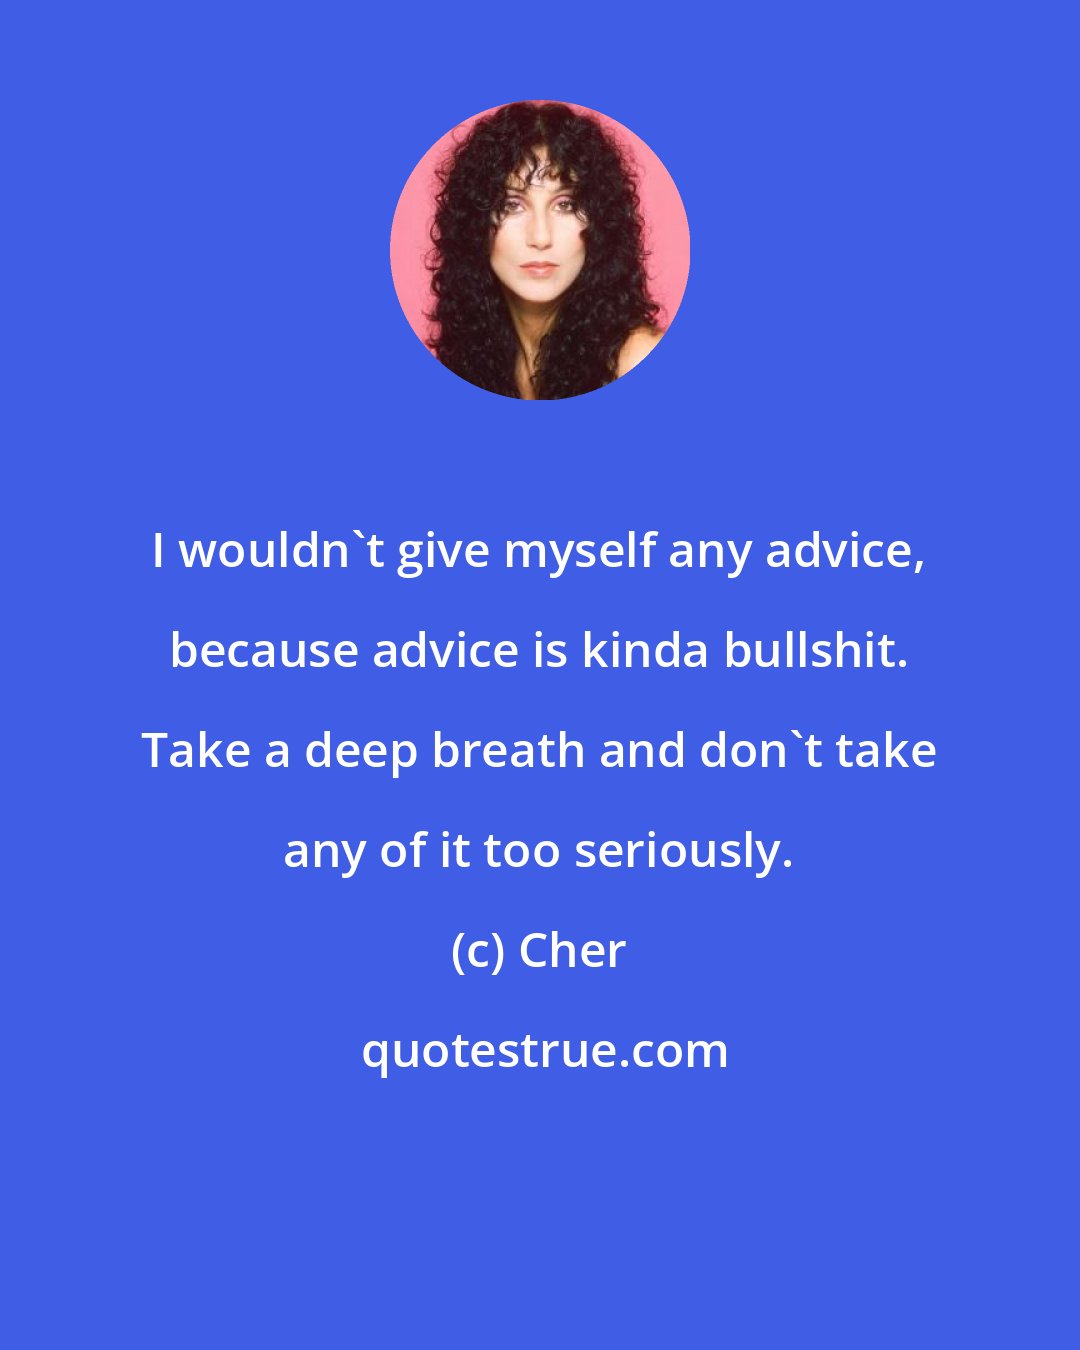 Cher: I wouldn't give myself any advice, because advice is kinda bullshit. Take a deep breath and don't take any of it too seriously.